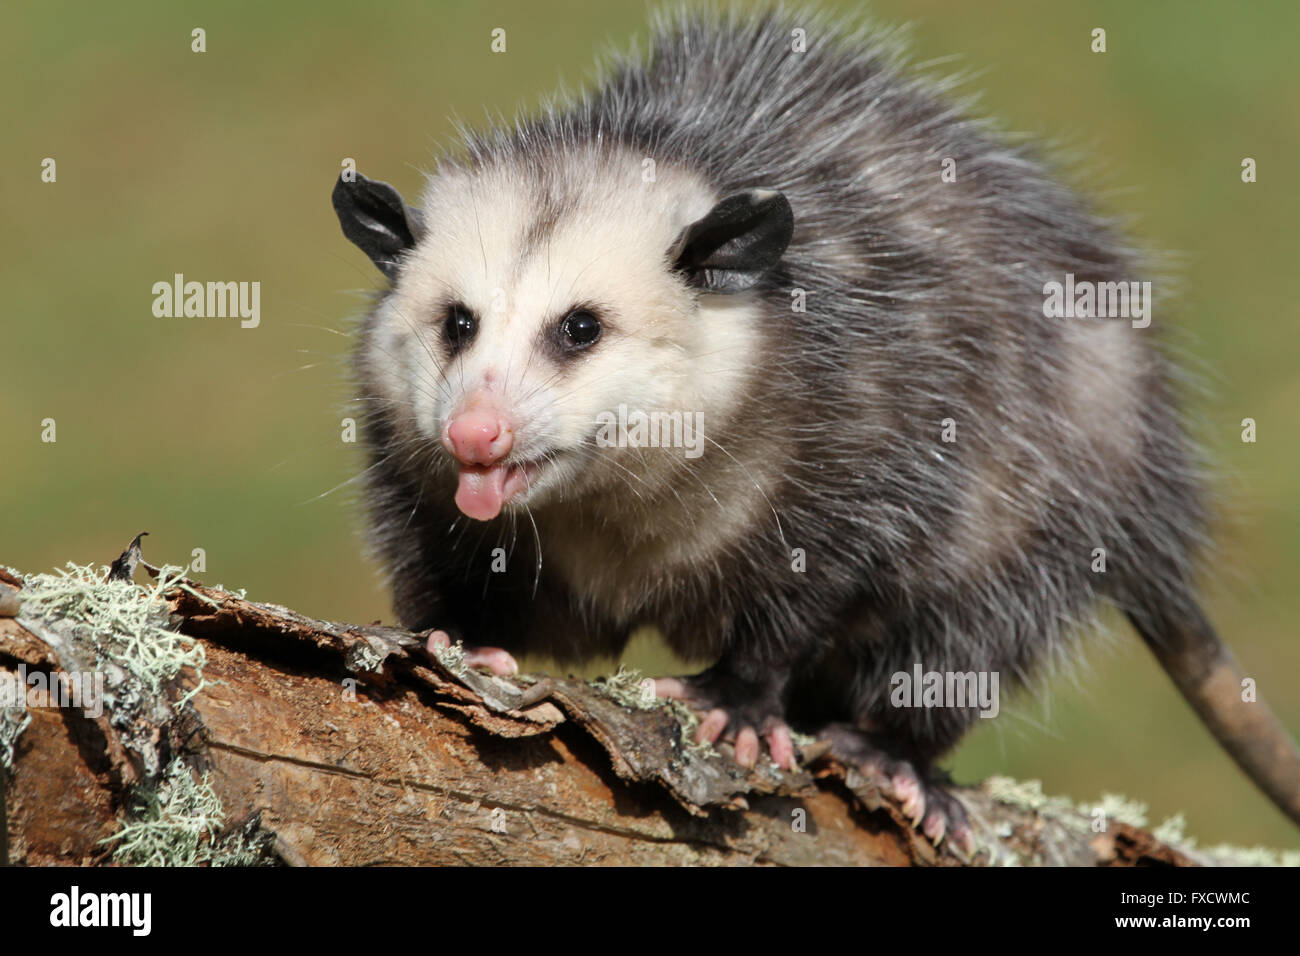 young adult possum puckering up Stock Photo